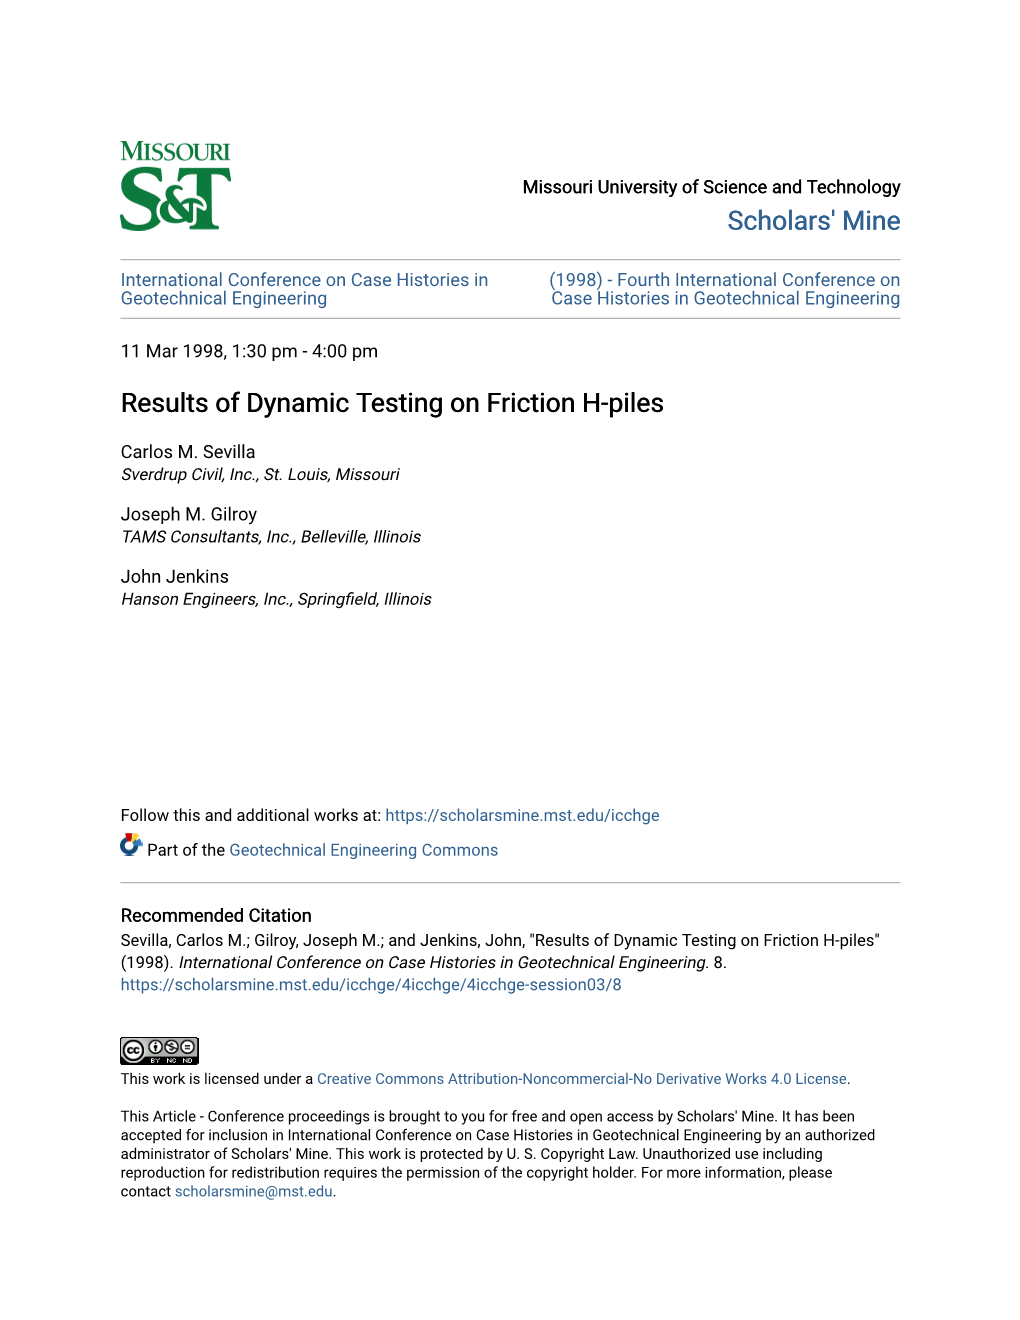 Results of Dynamic Testing on Friction H-Piles